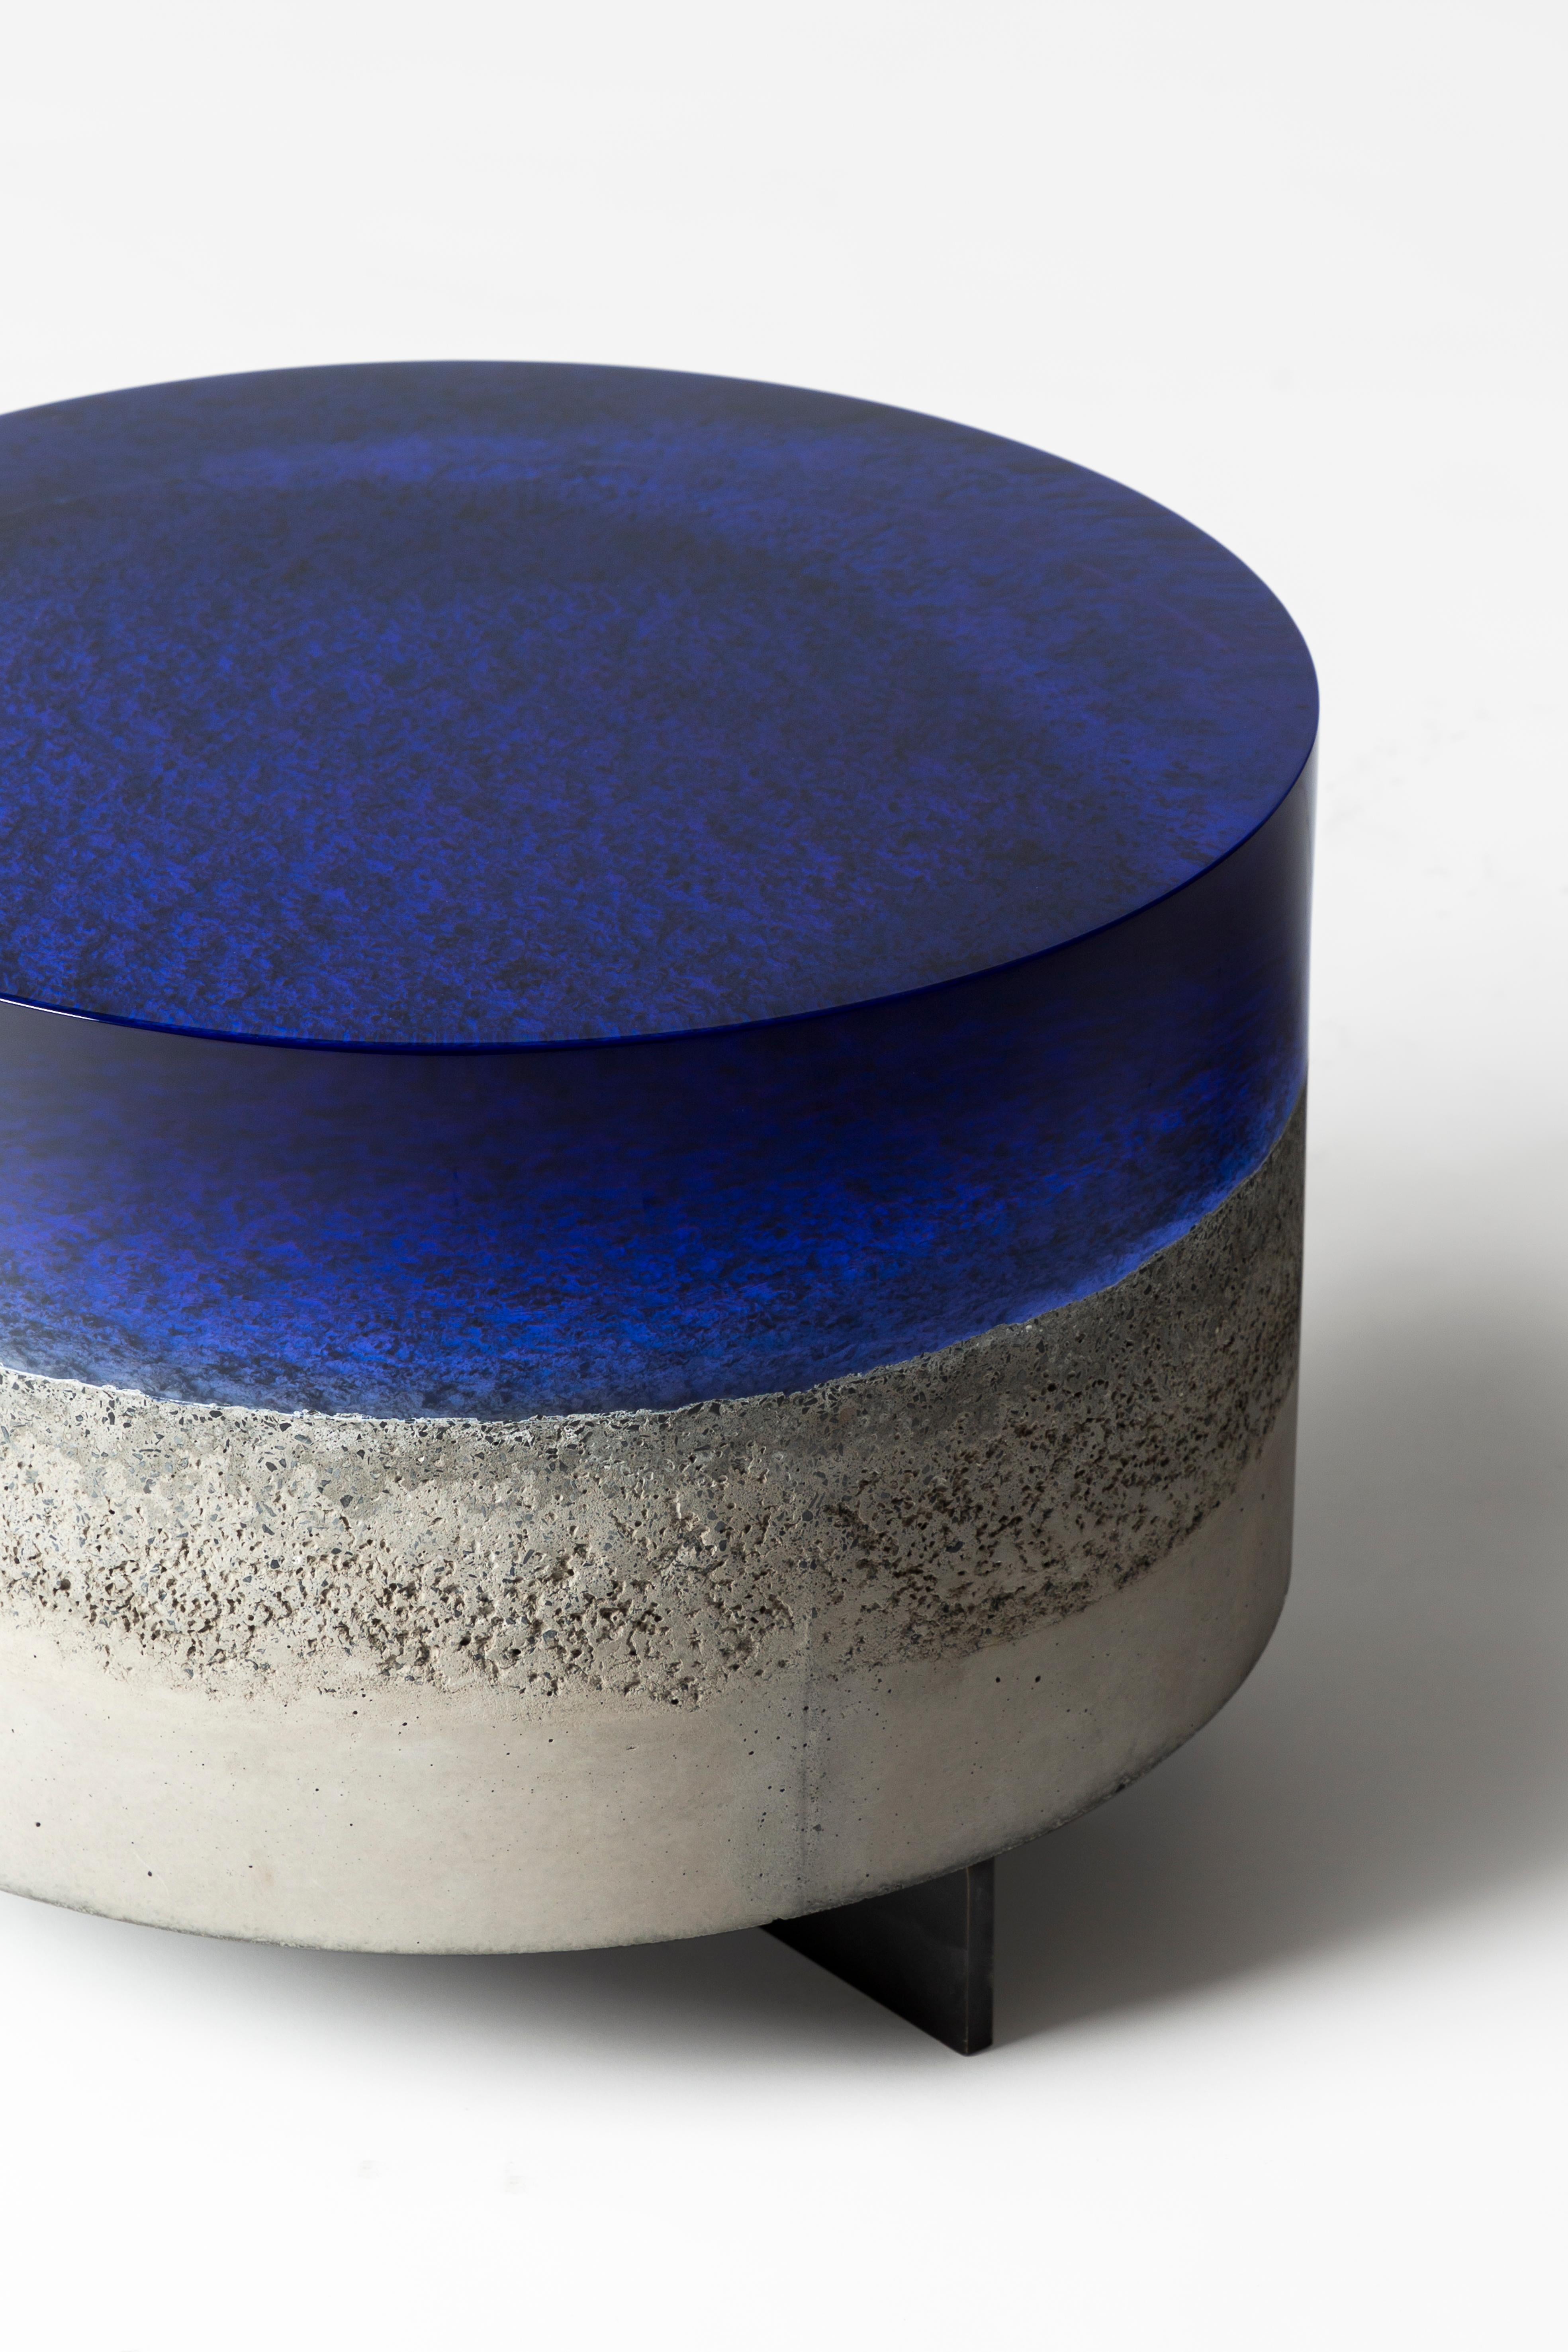 Featuring a juxtaposition of cast resin and concrete, this coffee table has been inspired by Lake Como and its countless shades. The resin, in the tones of blue and green, looks like water, revealing the concrete seabed.
The colors of Draga&Aurel